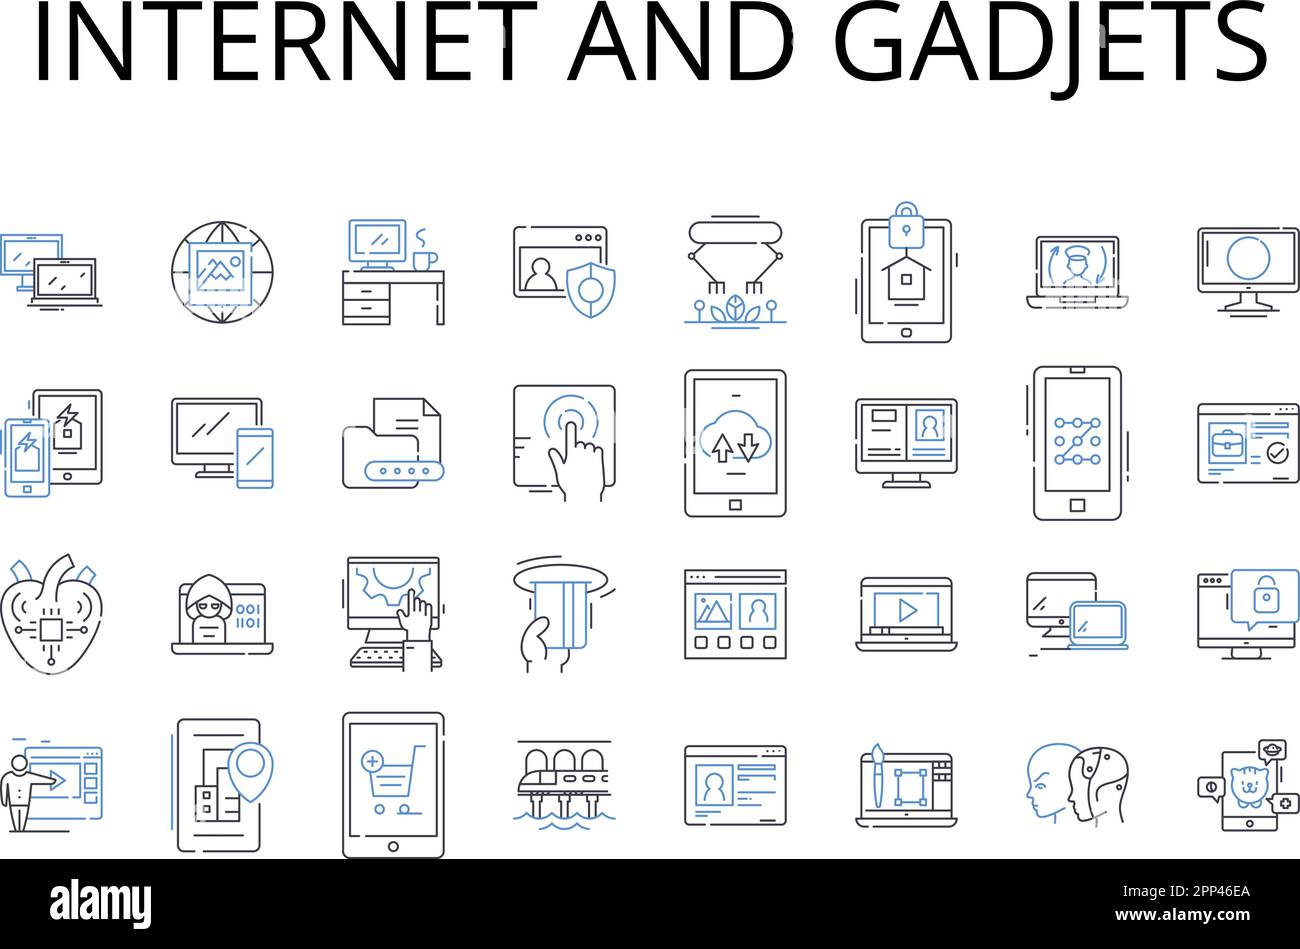 Internet and gadjets line icons collection. World Wide Web, Cyberspace, Online, Nerk, Web, Digital, Information superhighway vector and linear Stock Vector